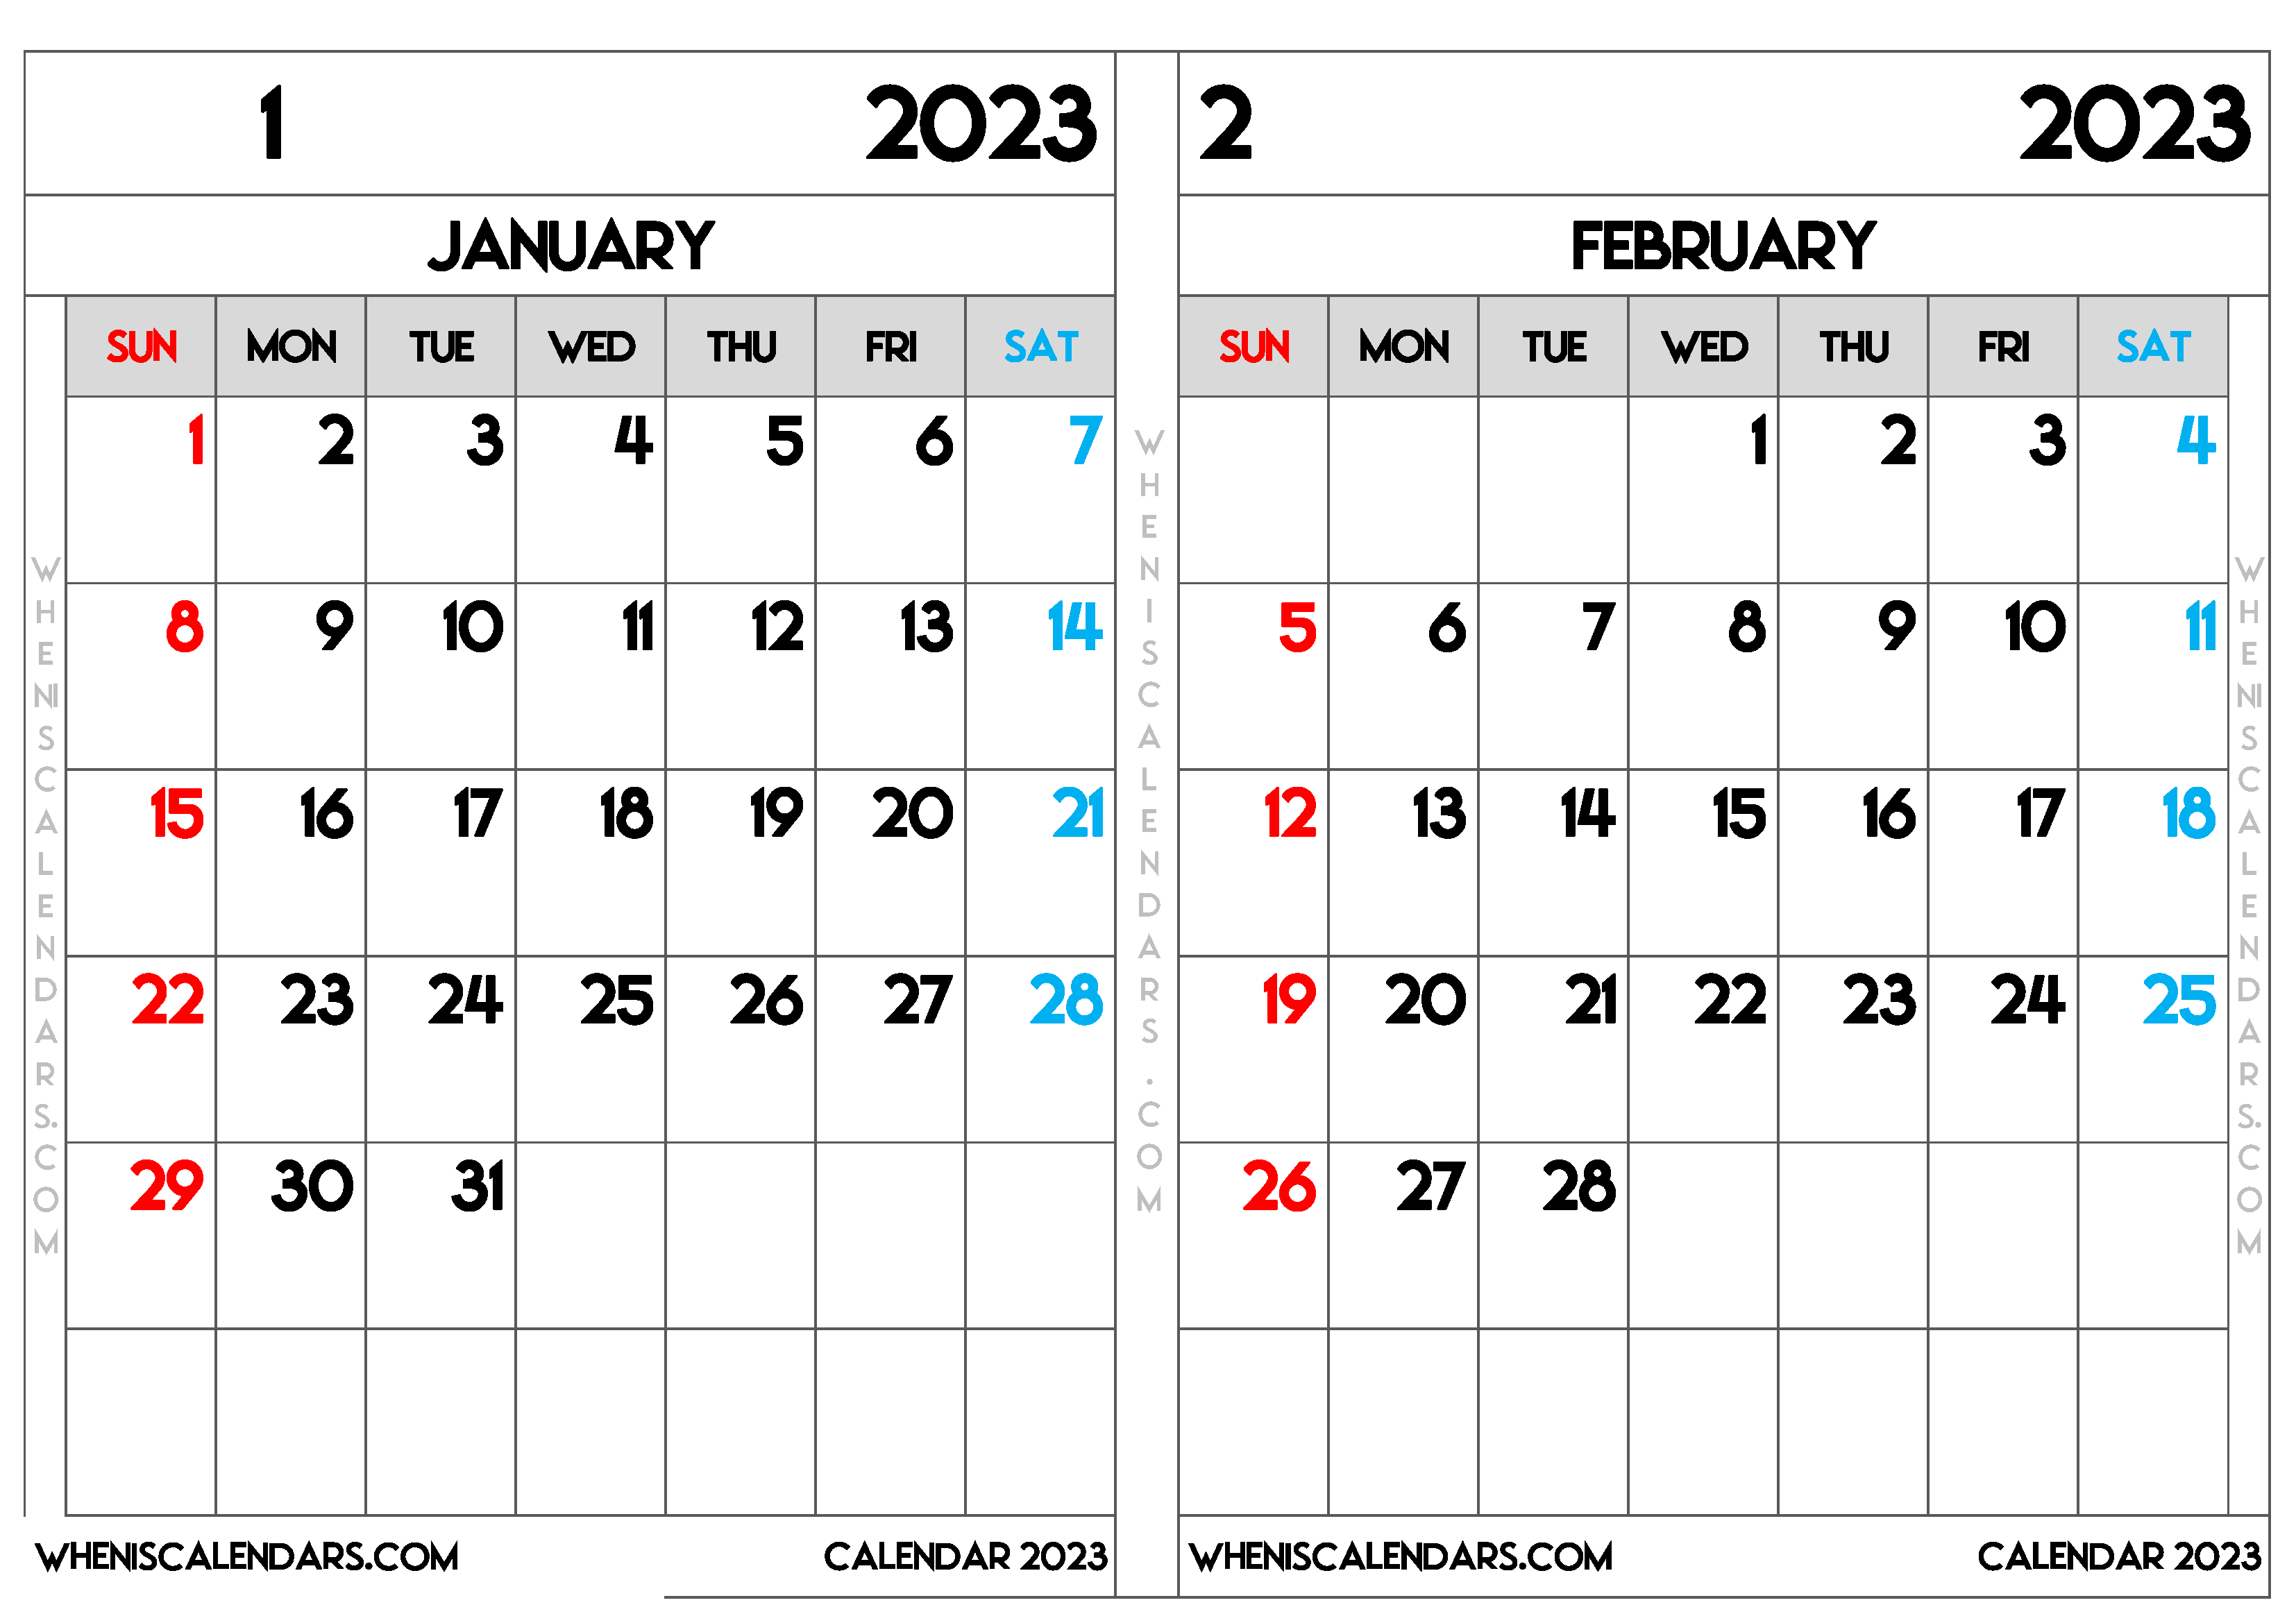 Download Printable January and February 2023 Calendar (PDF, PNG)